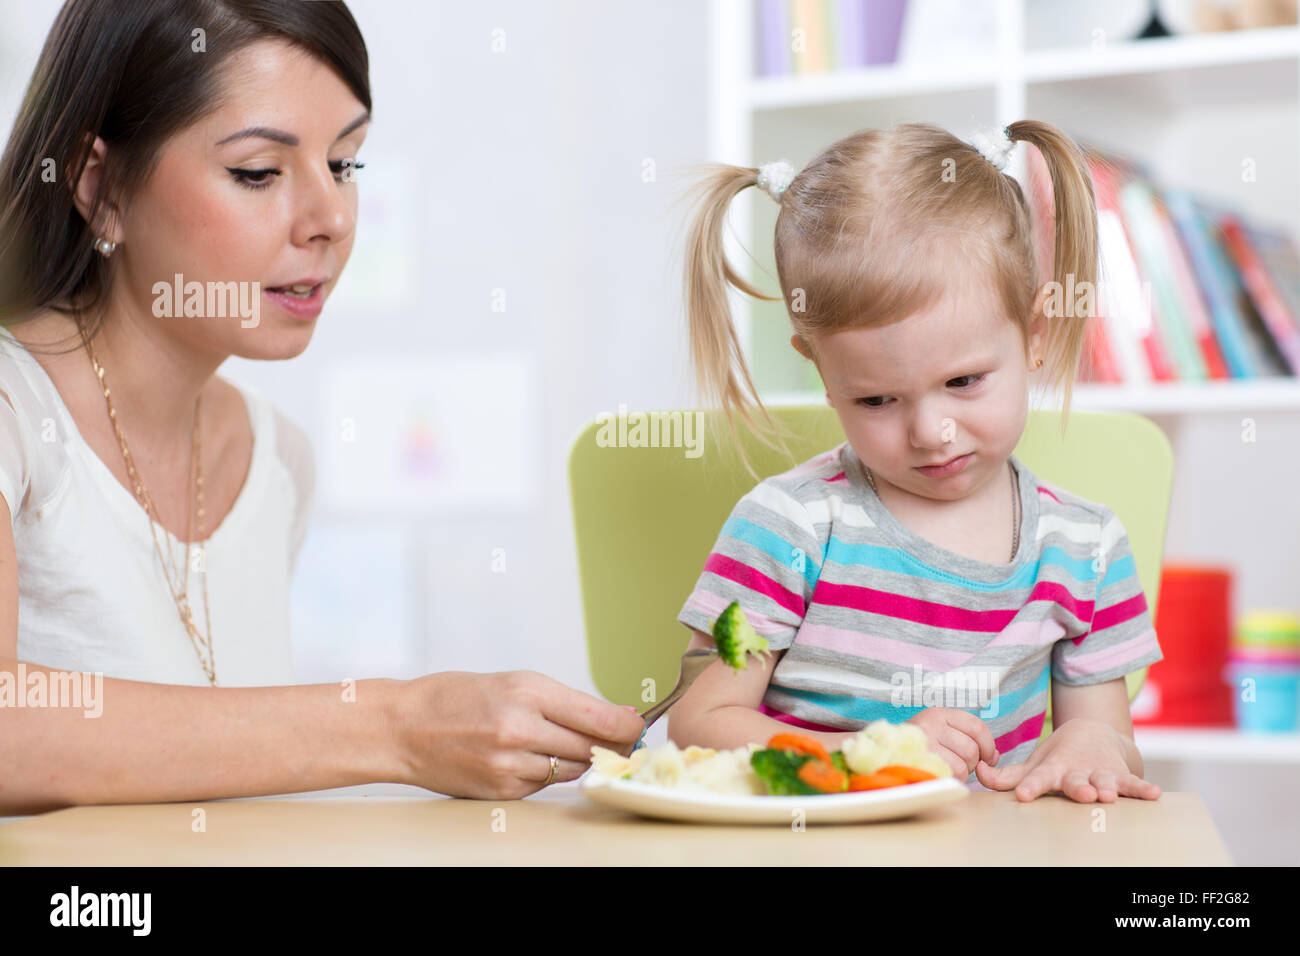 Child girl looks with disgust at healthy vegetables. Mother convinces her daughter to eat food. Stock Photo